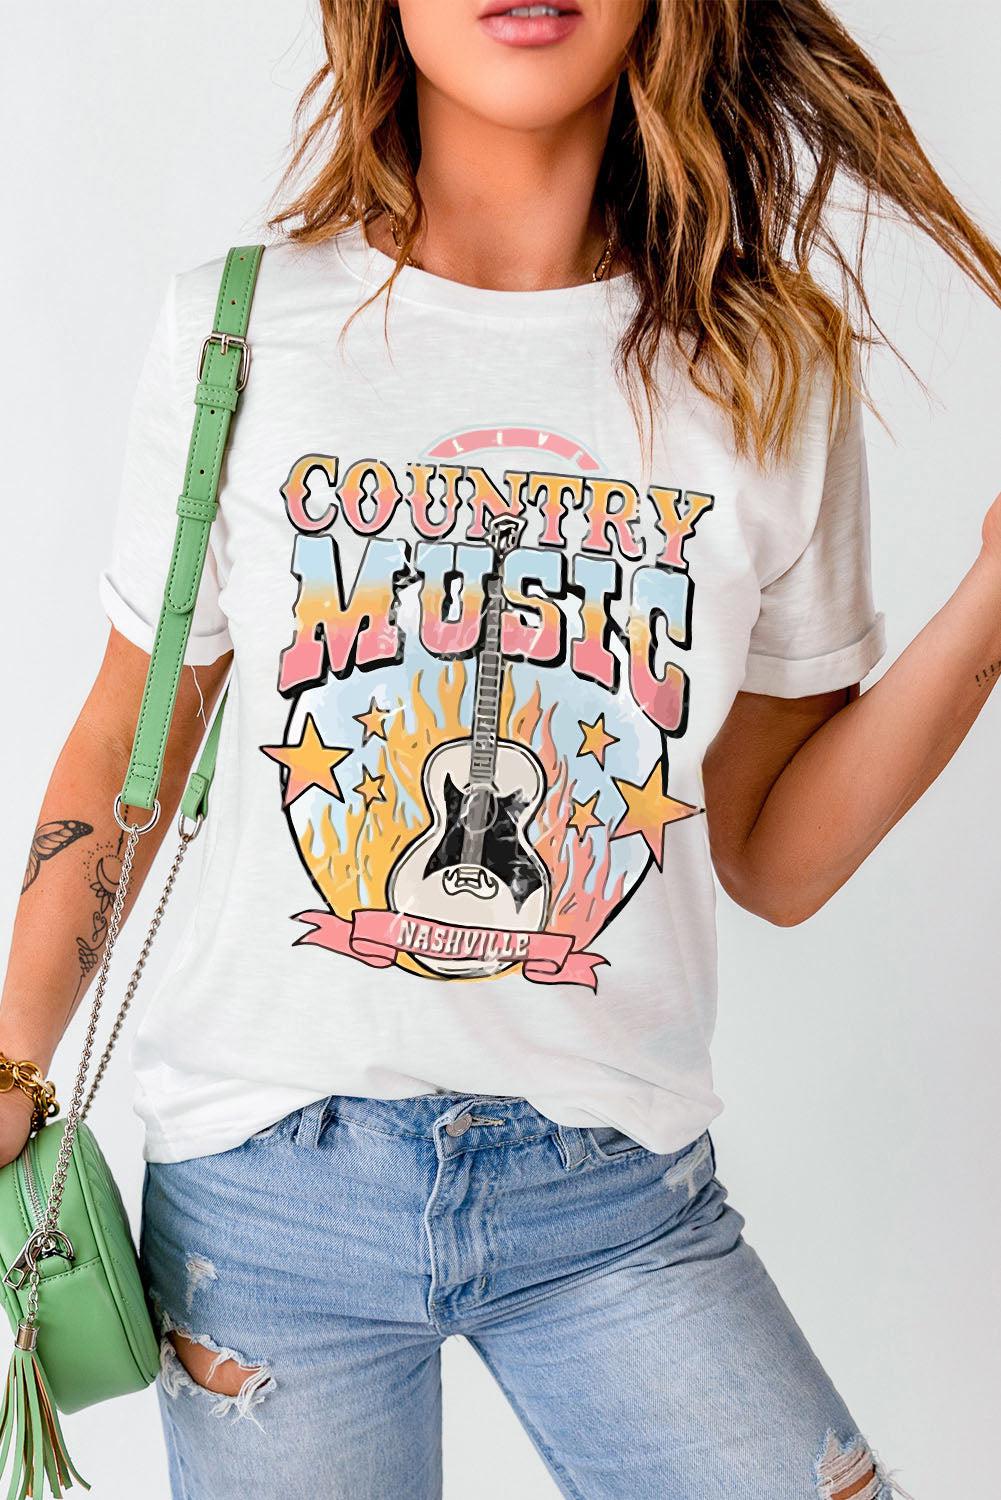 COUNTRY MUSIC NASHVILLE Graphic Tee Shirt BLUE ZONE PLANET